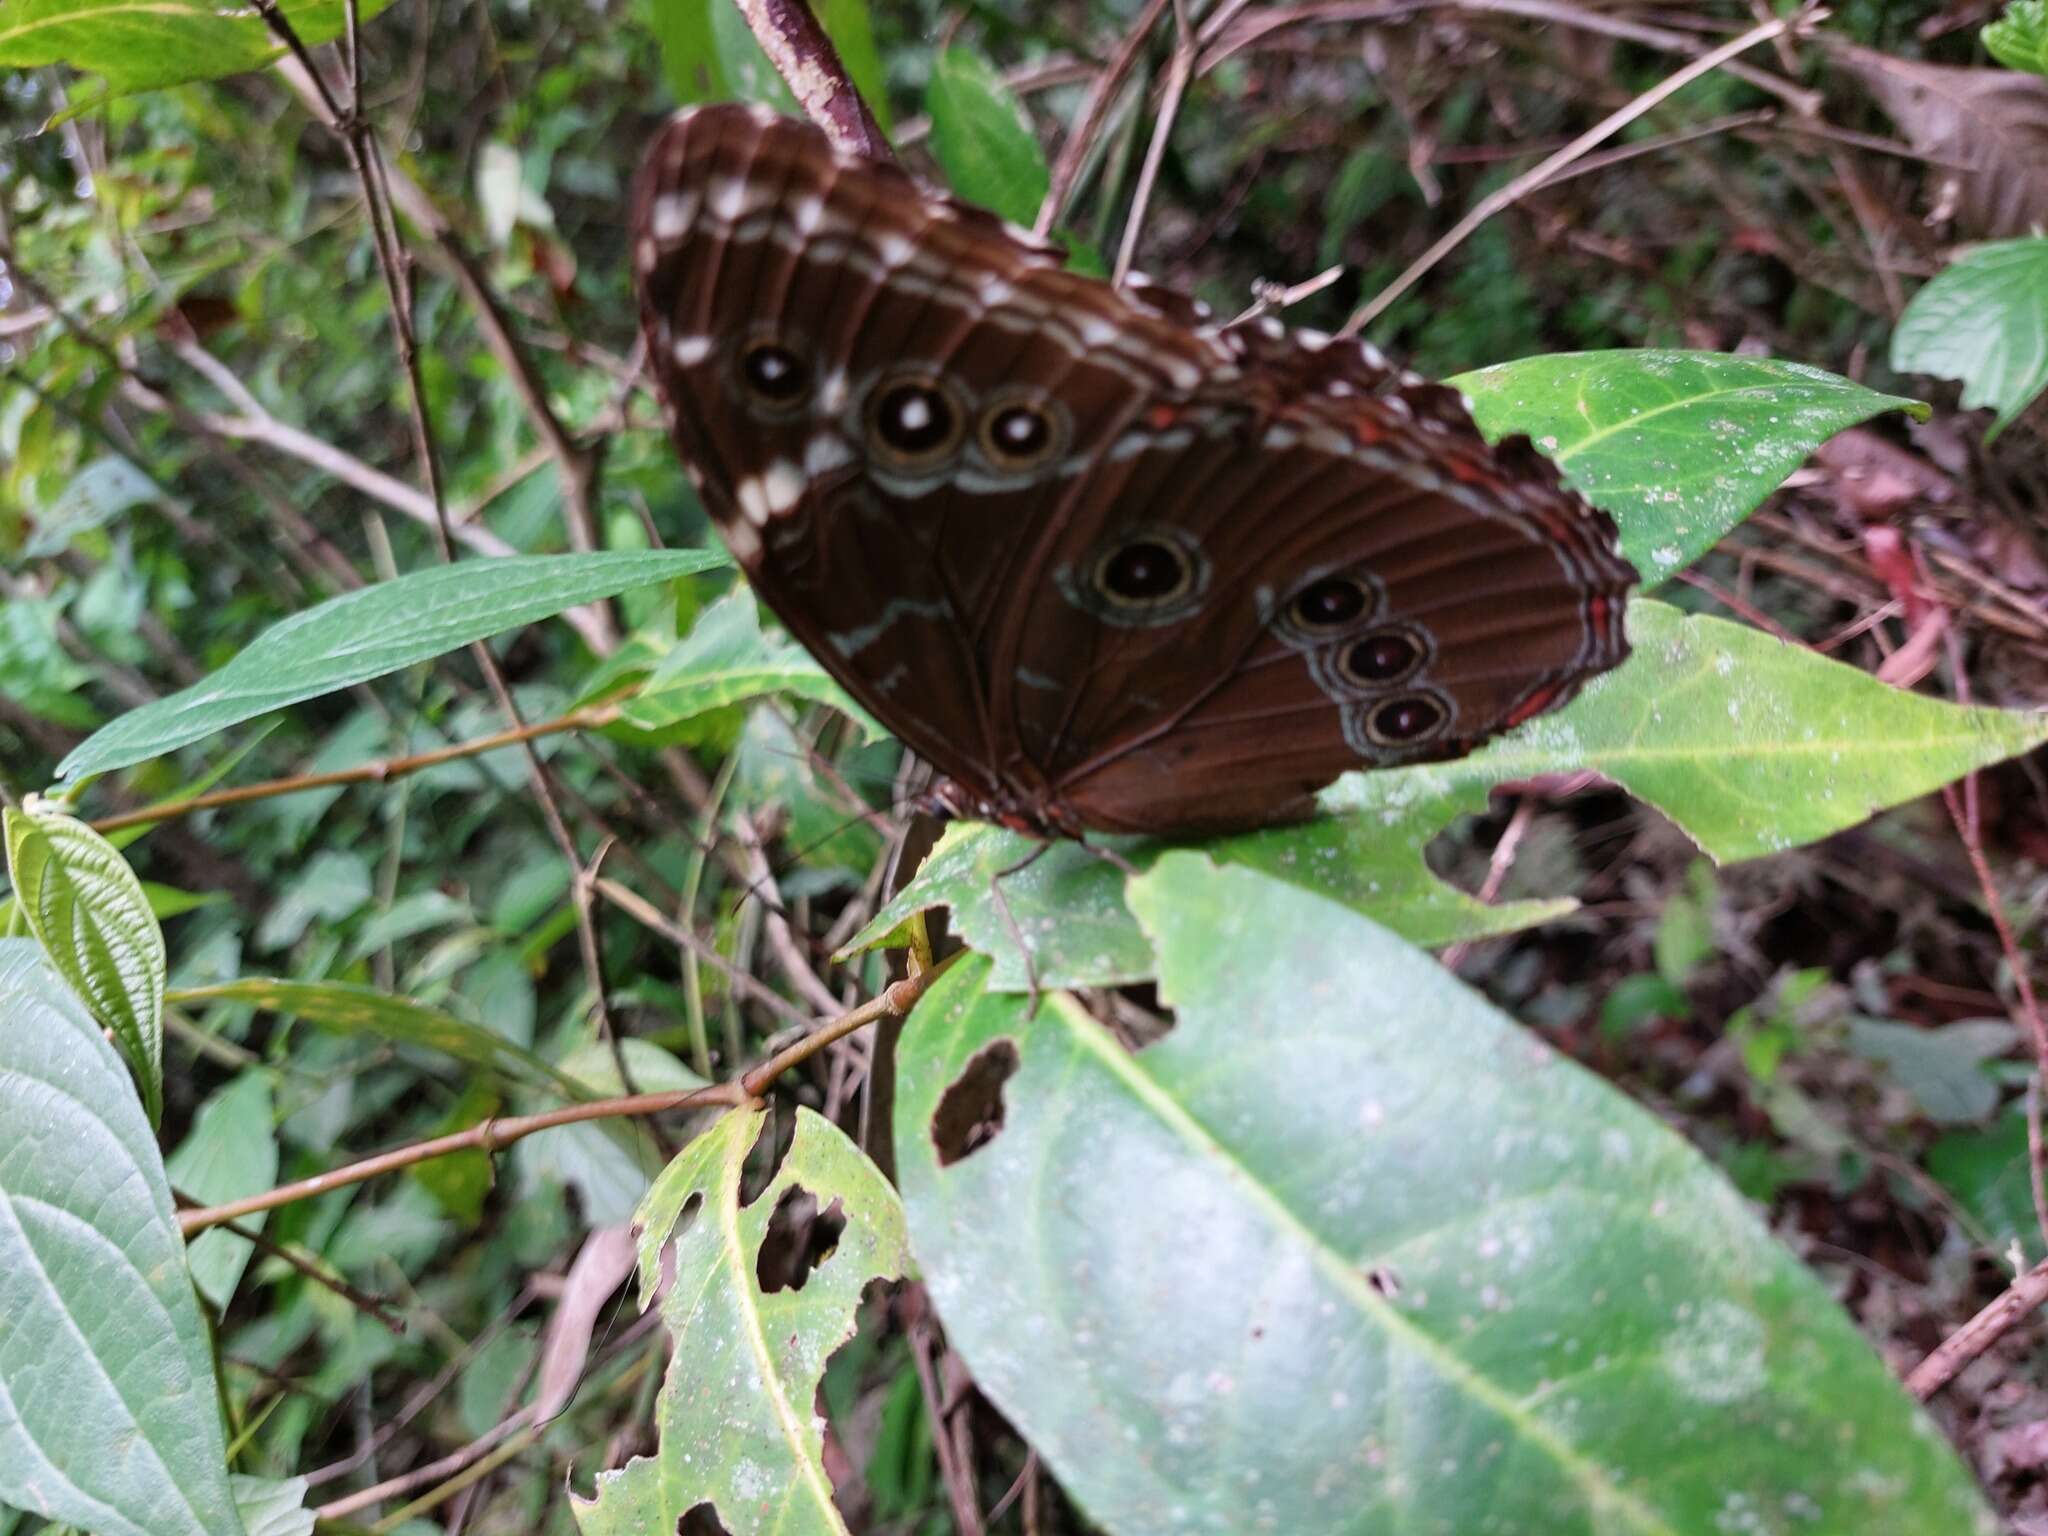 Image of Blue-banded Morpho Butterfly